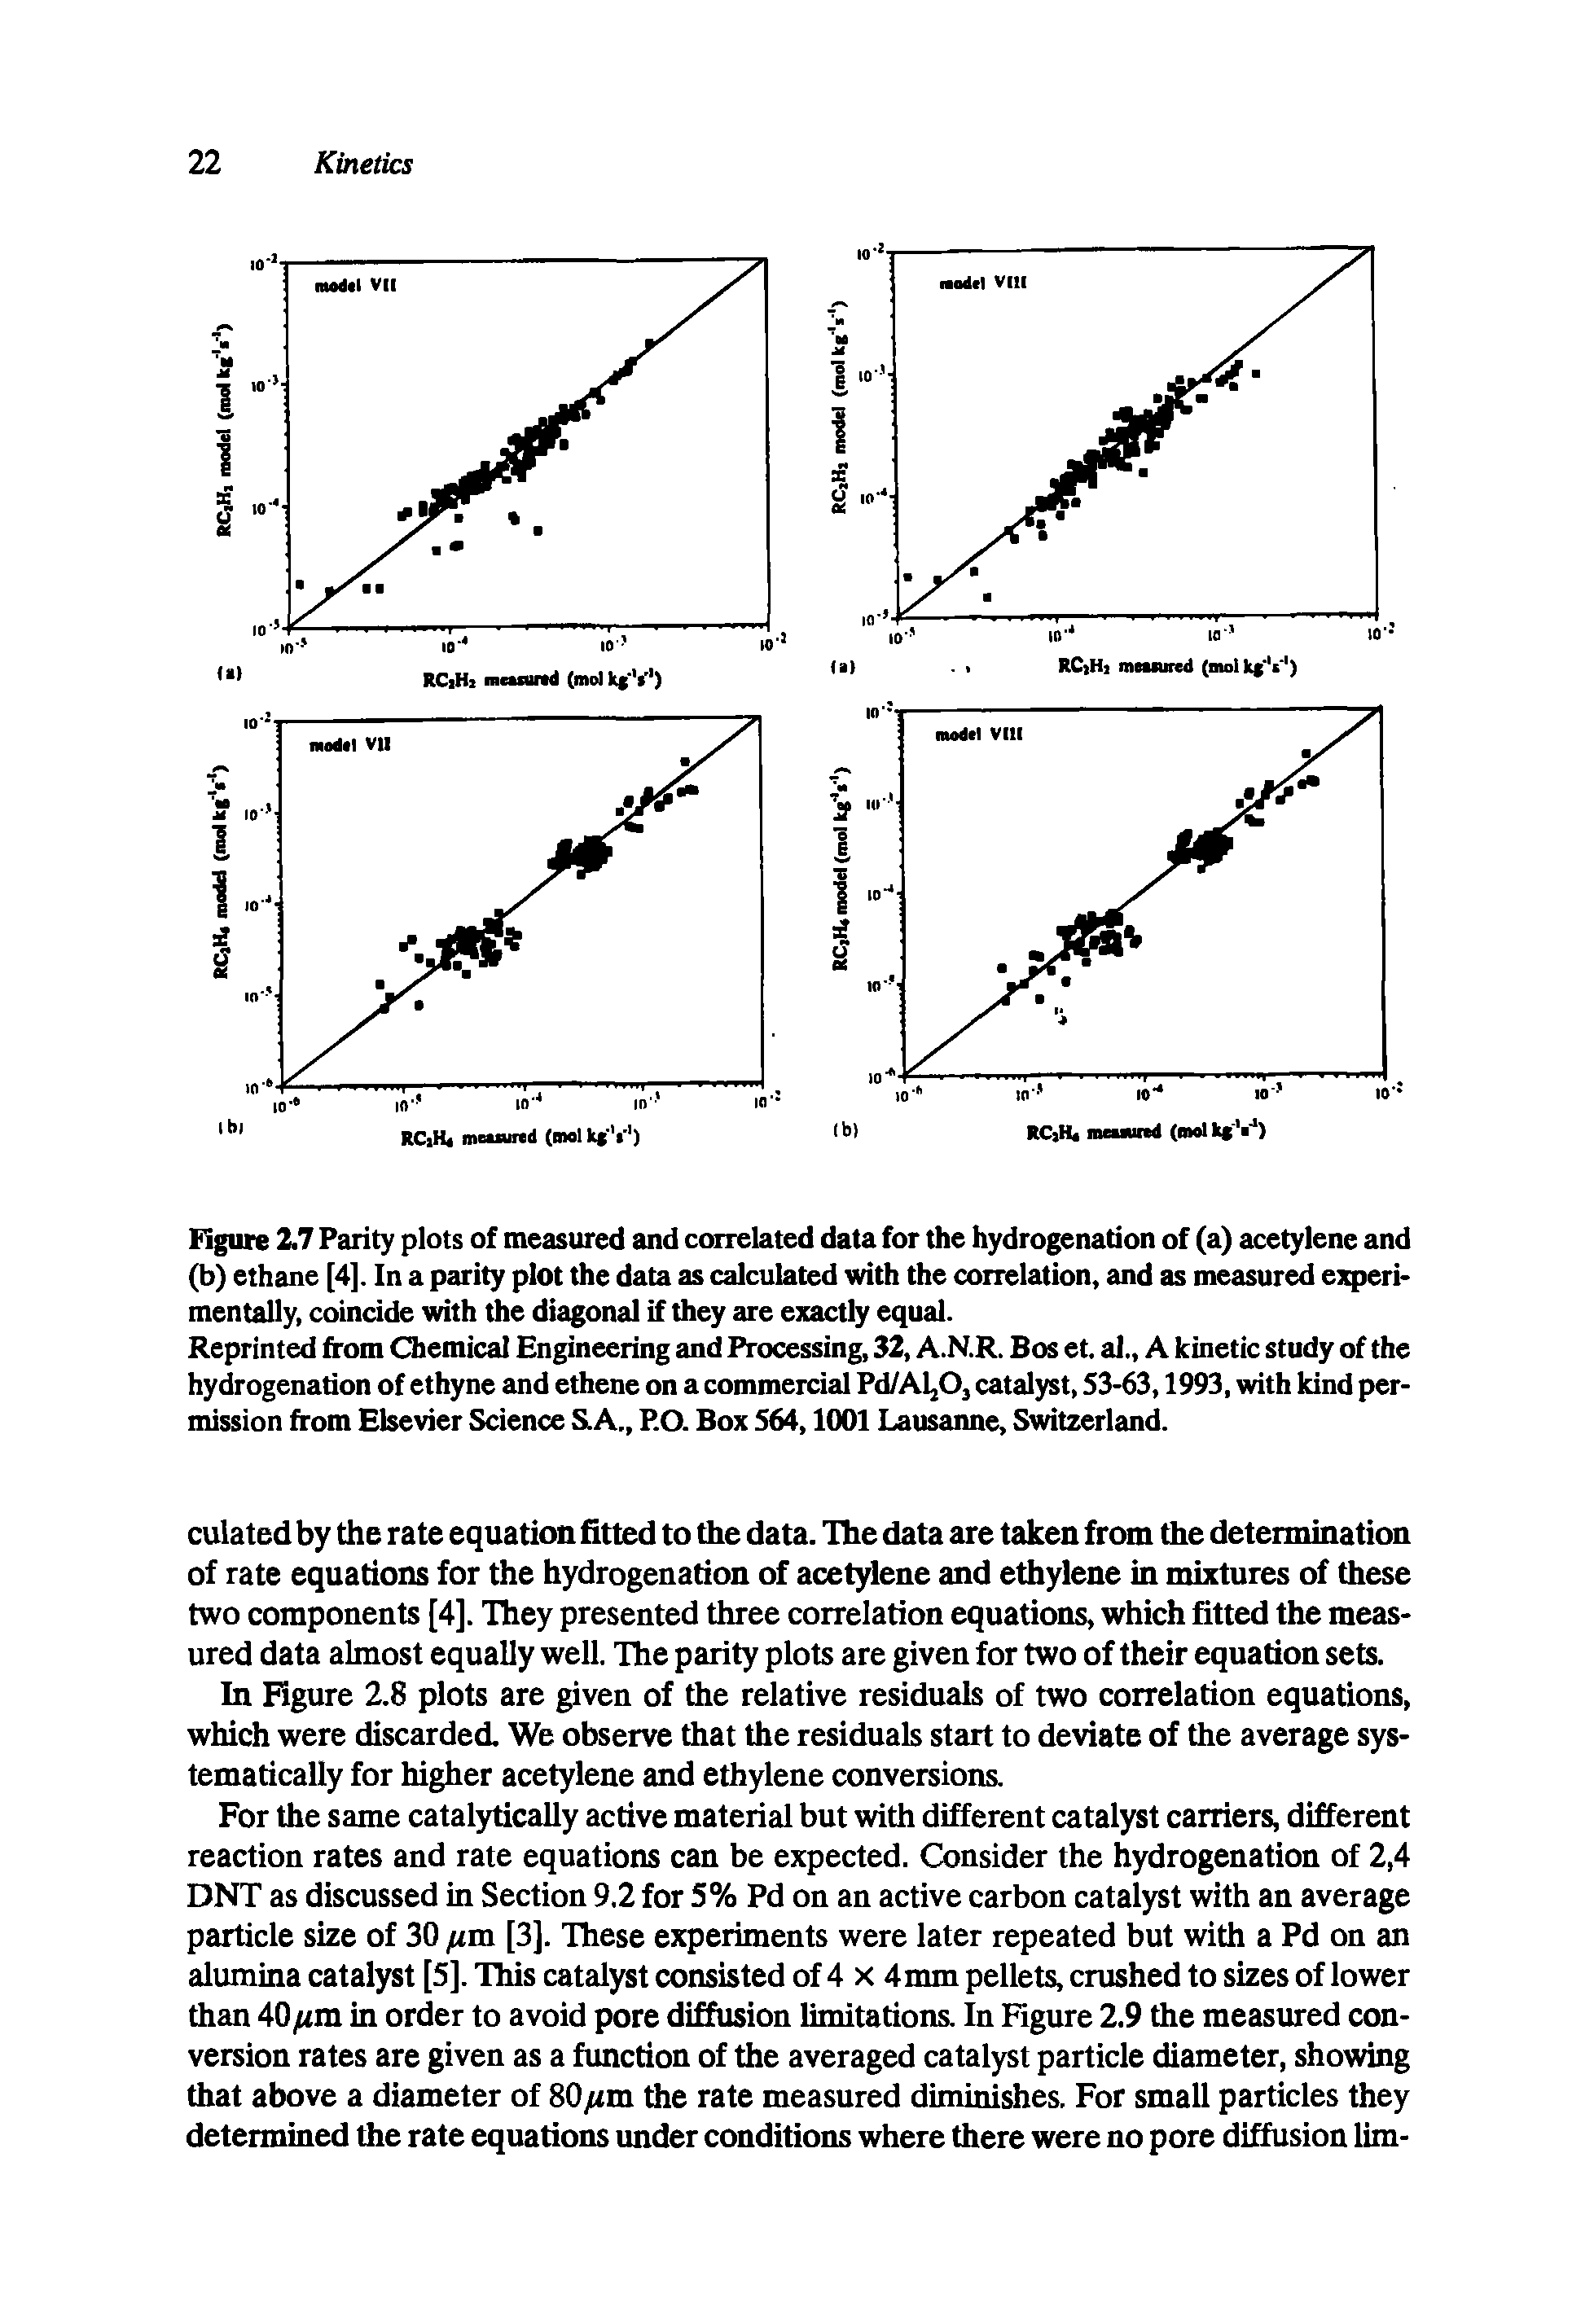 Figure 2.7 Parity plots of measured and correlated data for the hydrogenation of (a) acetylene and (b) ethane [4]. In a parity plot the data as calculated with the correlation, and as measured experimentally, coincide with the diagonal if they are exactly equal.